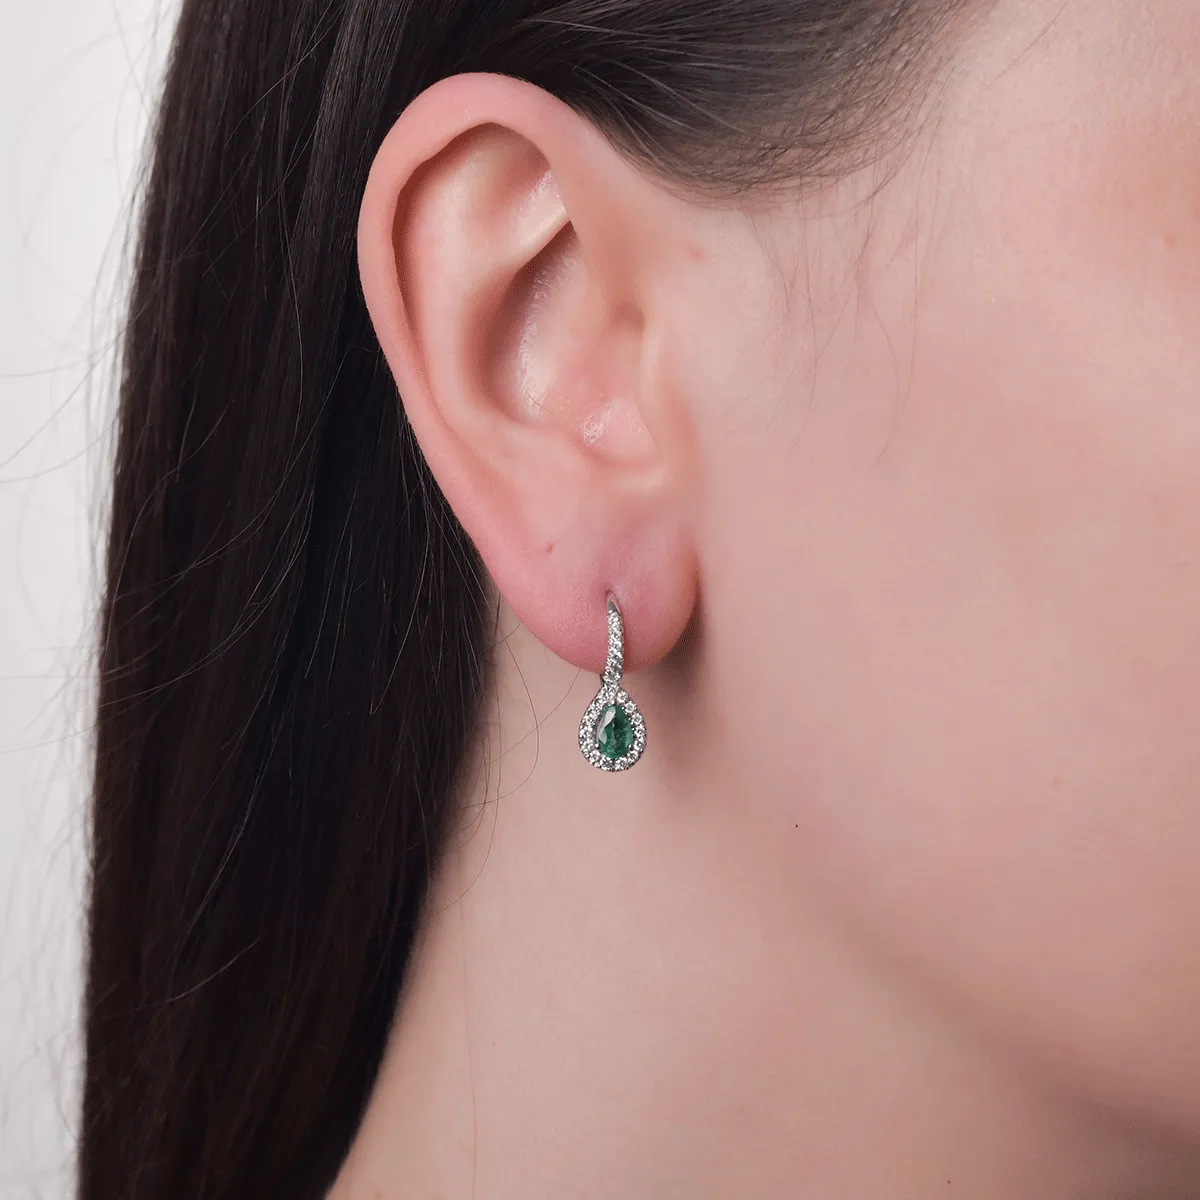 18K white gold earrings with 0.71ct emeralds and 0.36ct diamonds